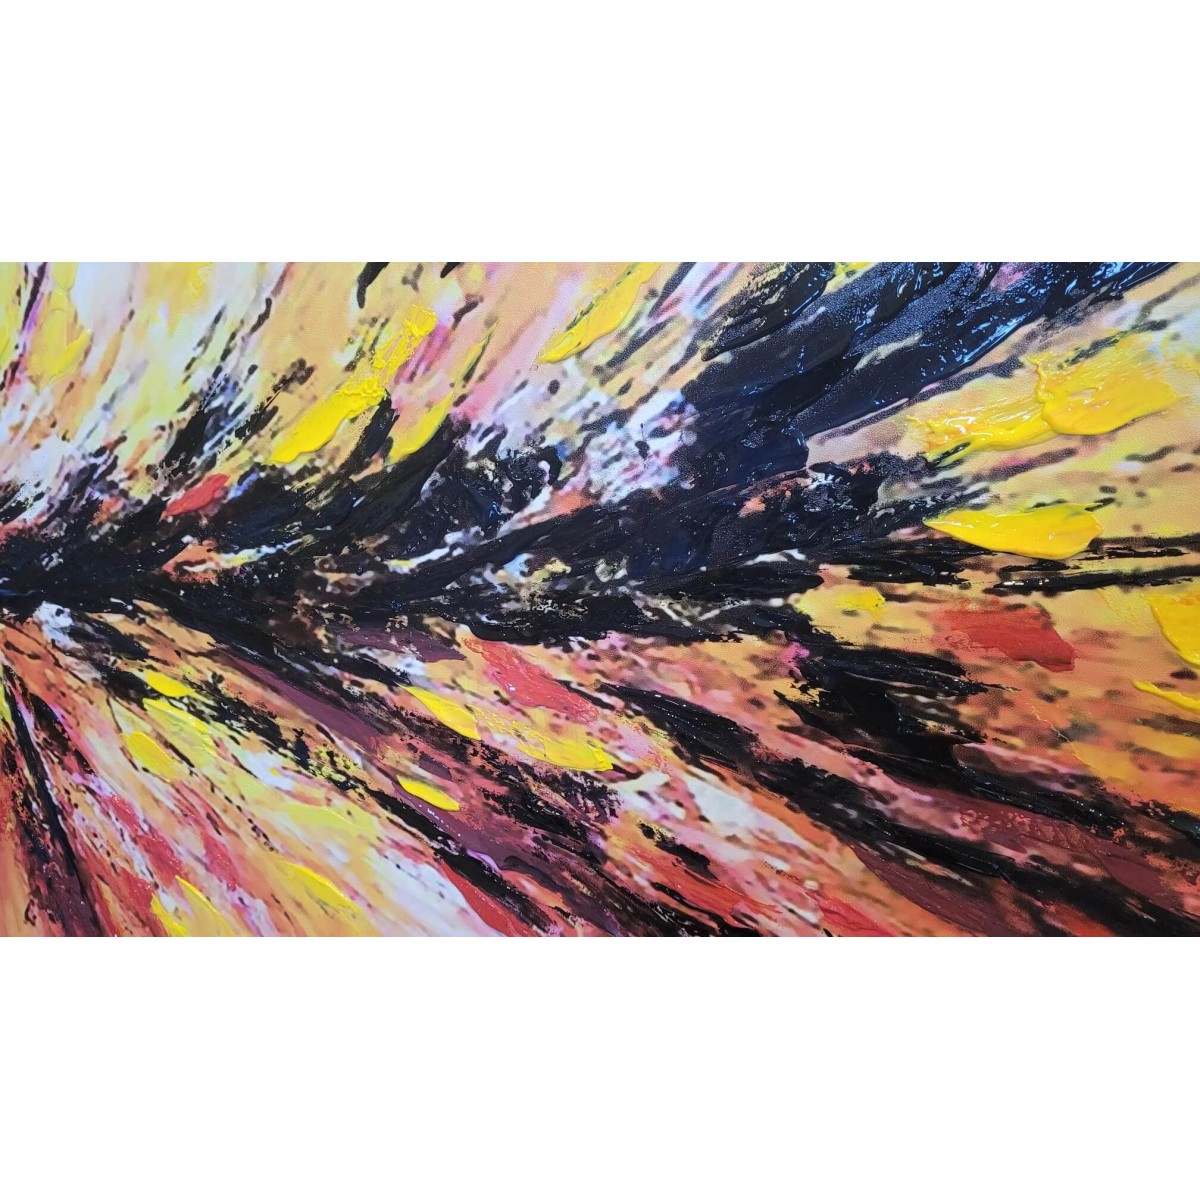 Abstract Orange Explosion Textured Partial Oil Painting